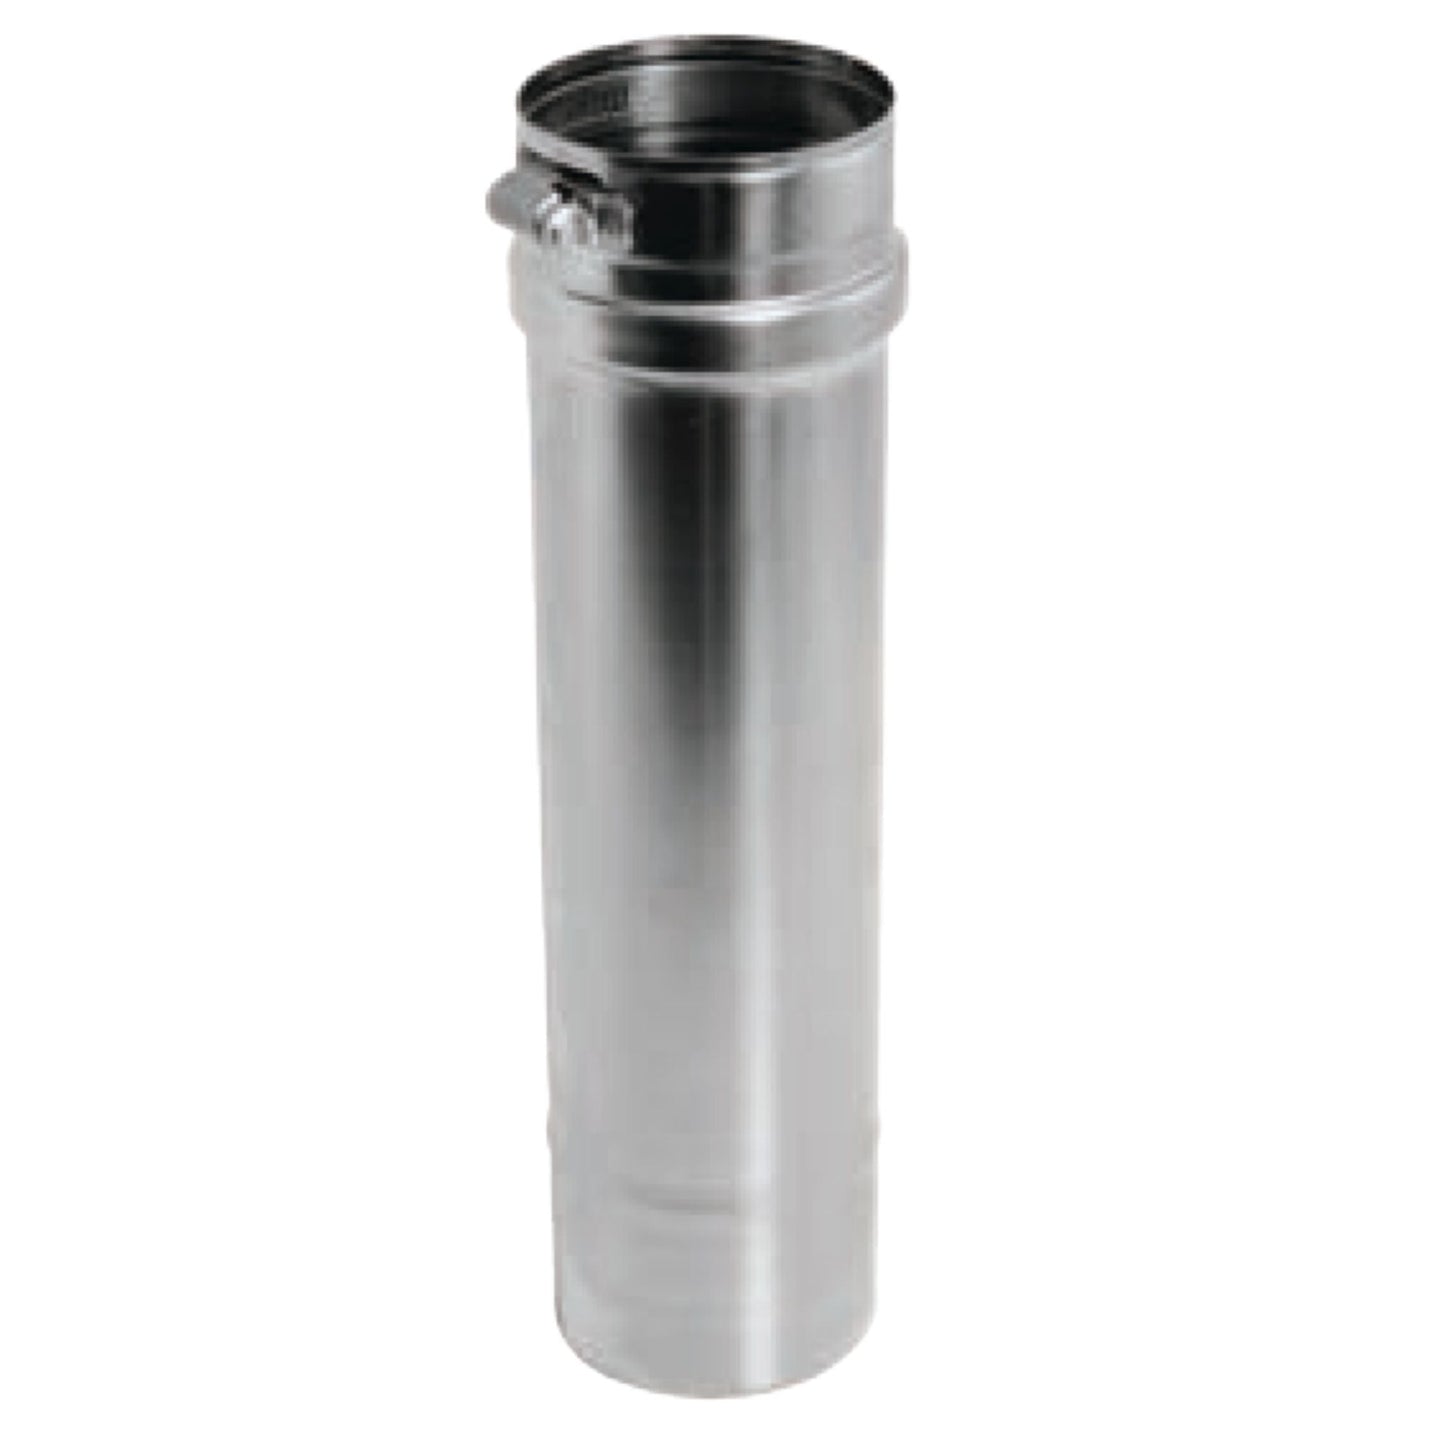 DuraVent FasNSeal 12" x 12" 29-4C Stainless Steel Vent Length